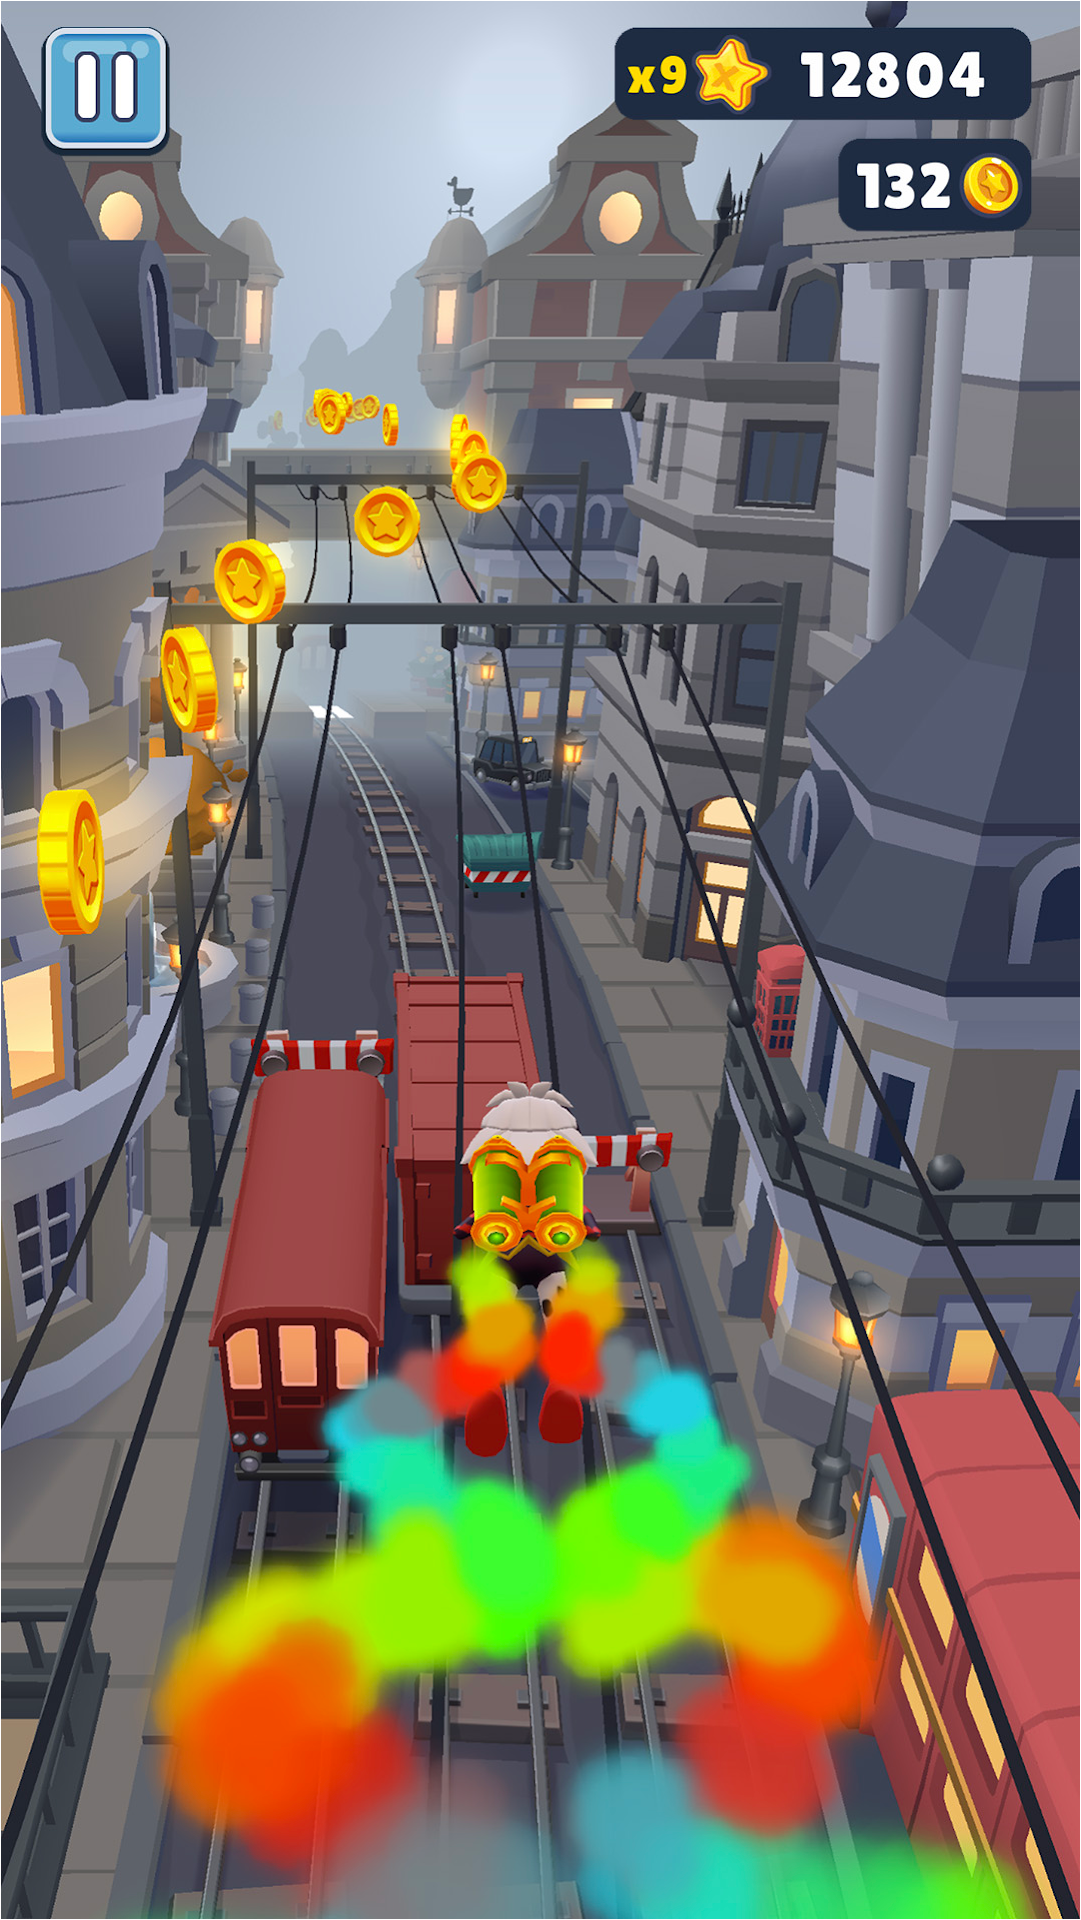 Free download Subway Surfers for Xolo X1000, APK 1.62.0 for Xolo X1000